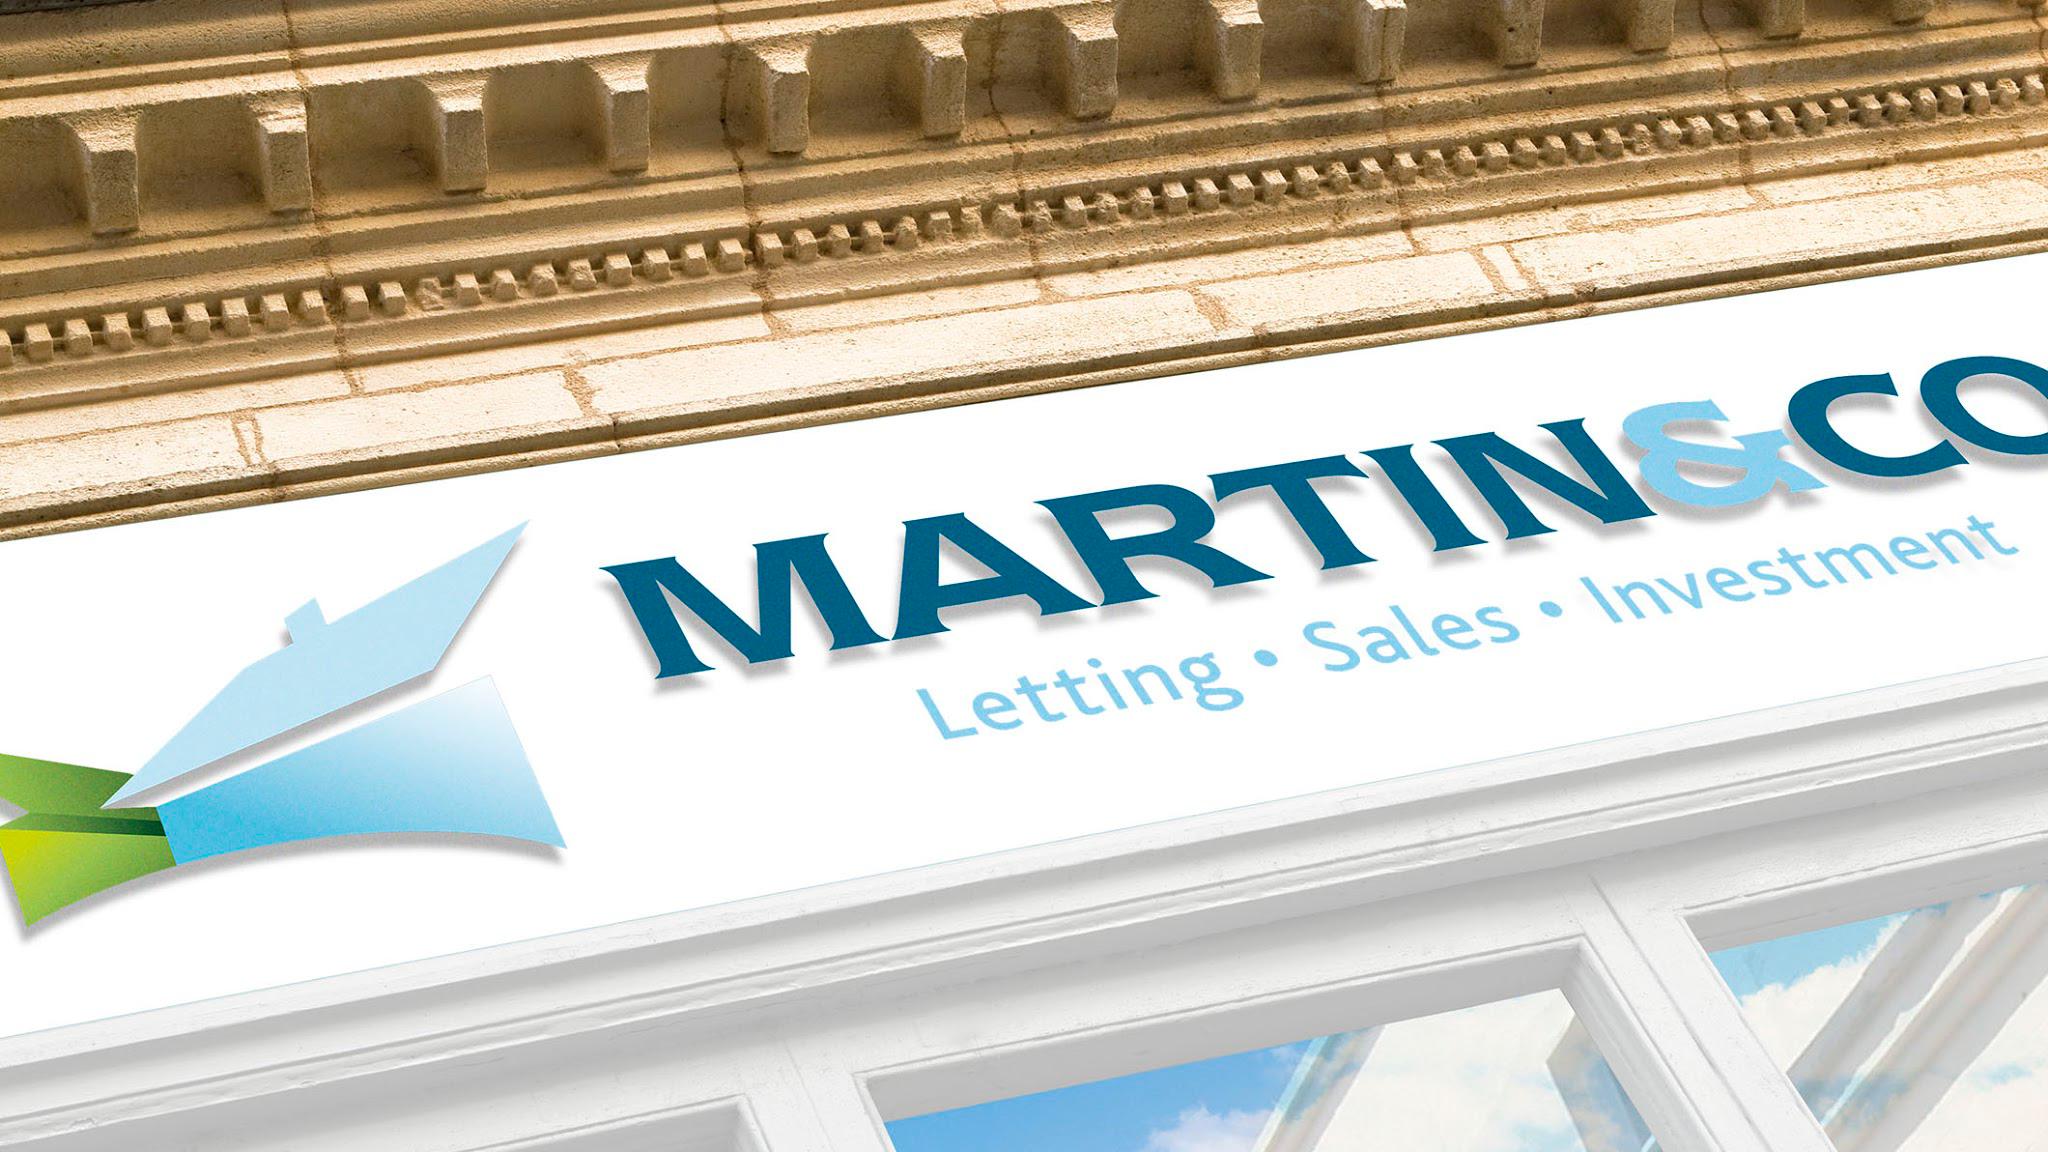 Images Martin & Co Liverpool South Lettings & Estate Agents